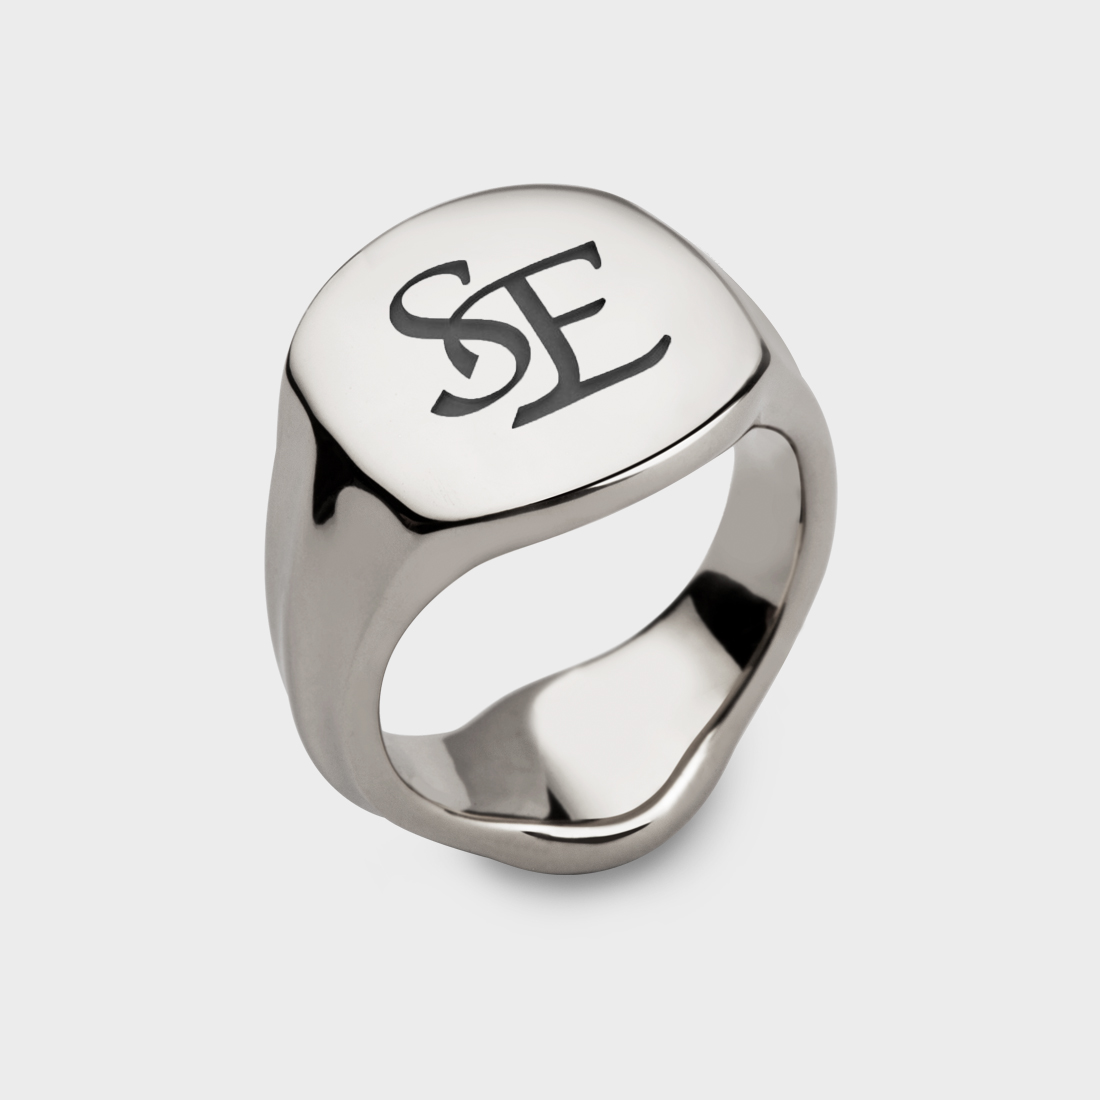 A sterling silver signet ring with two interlocking letters S and E engraved on it